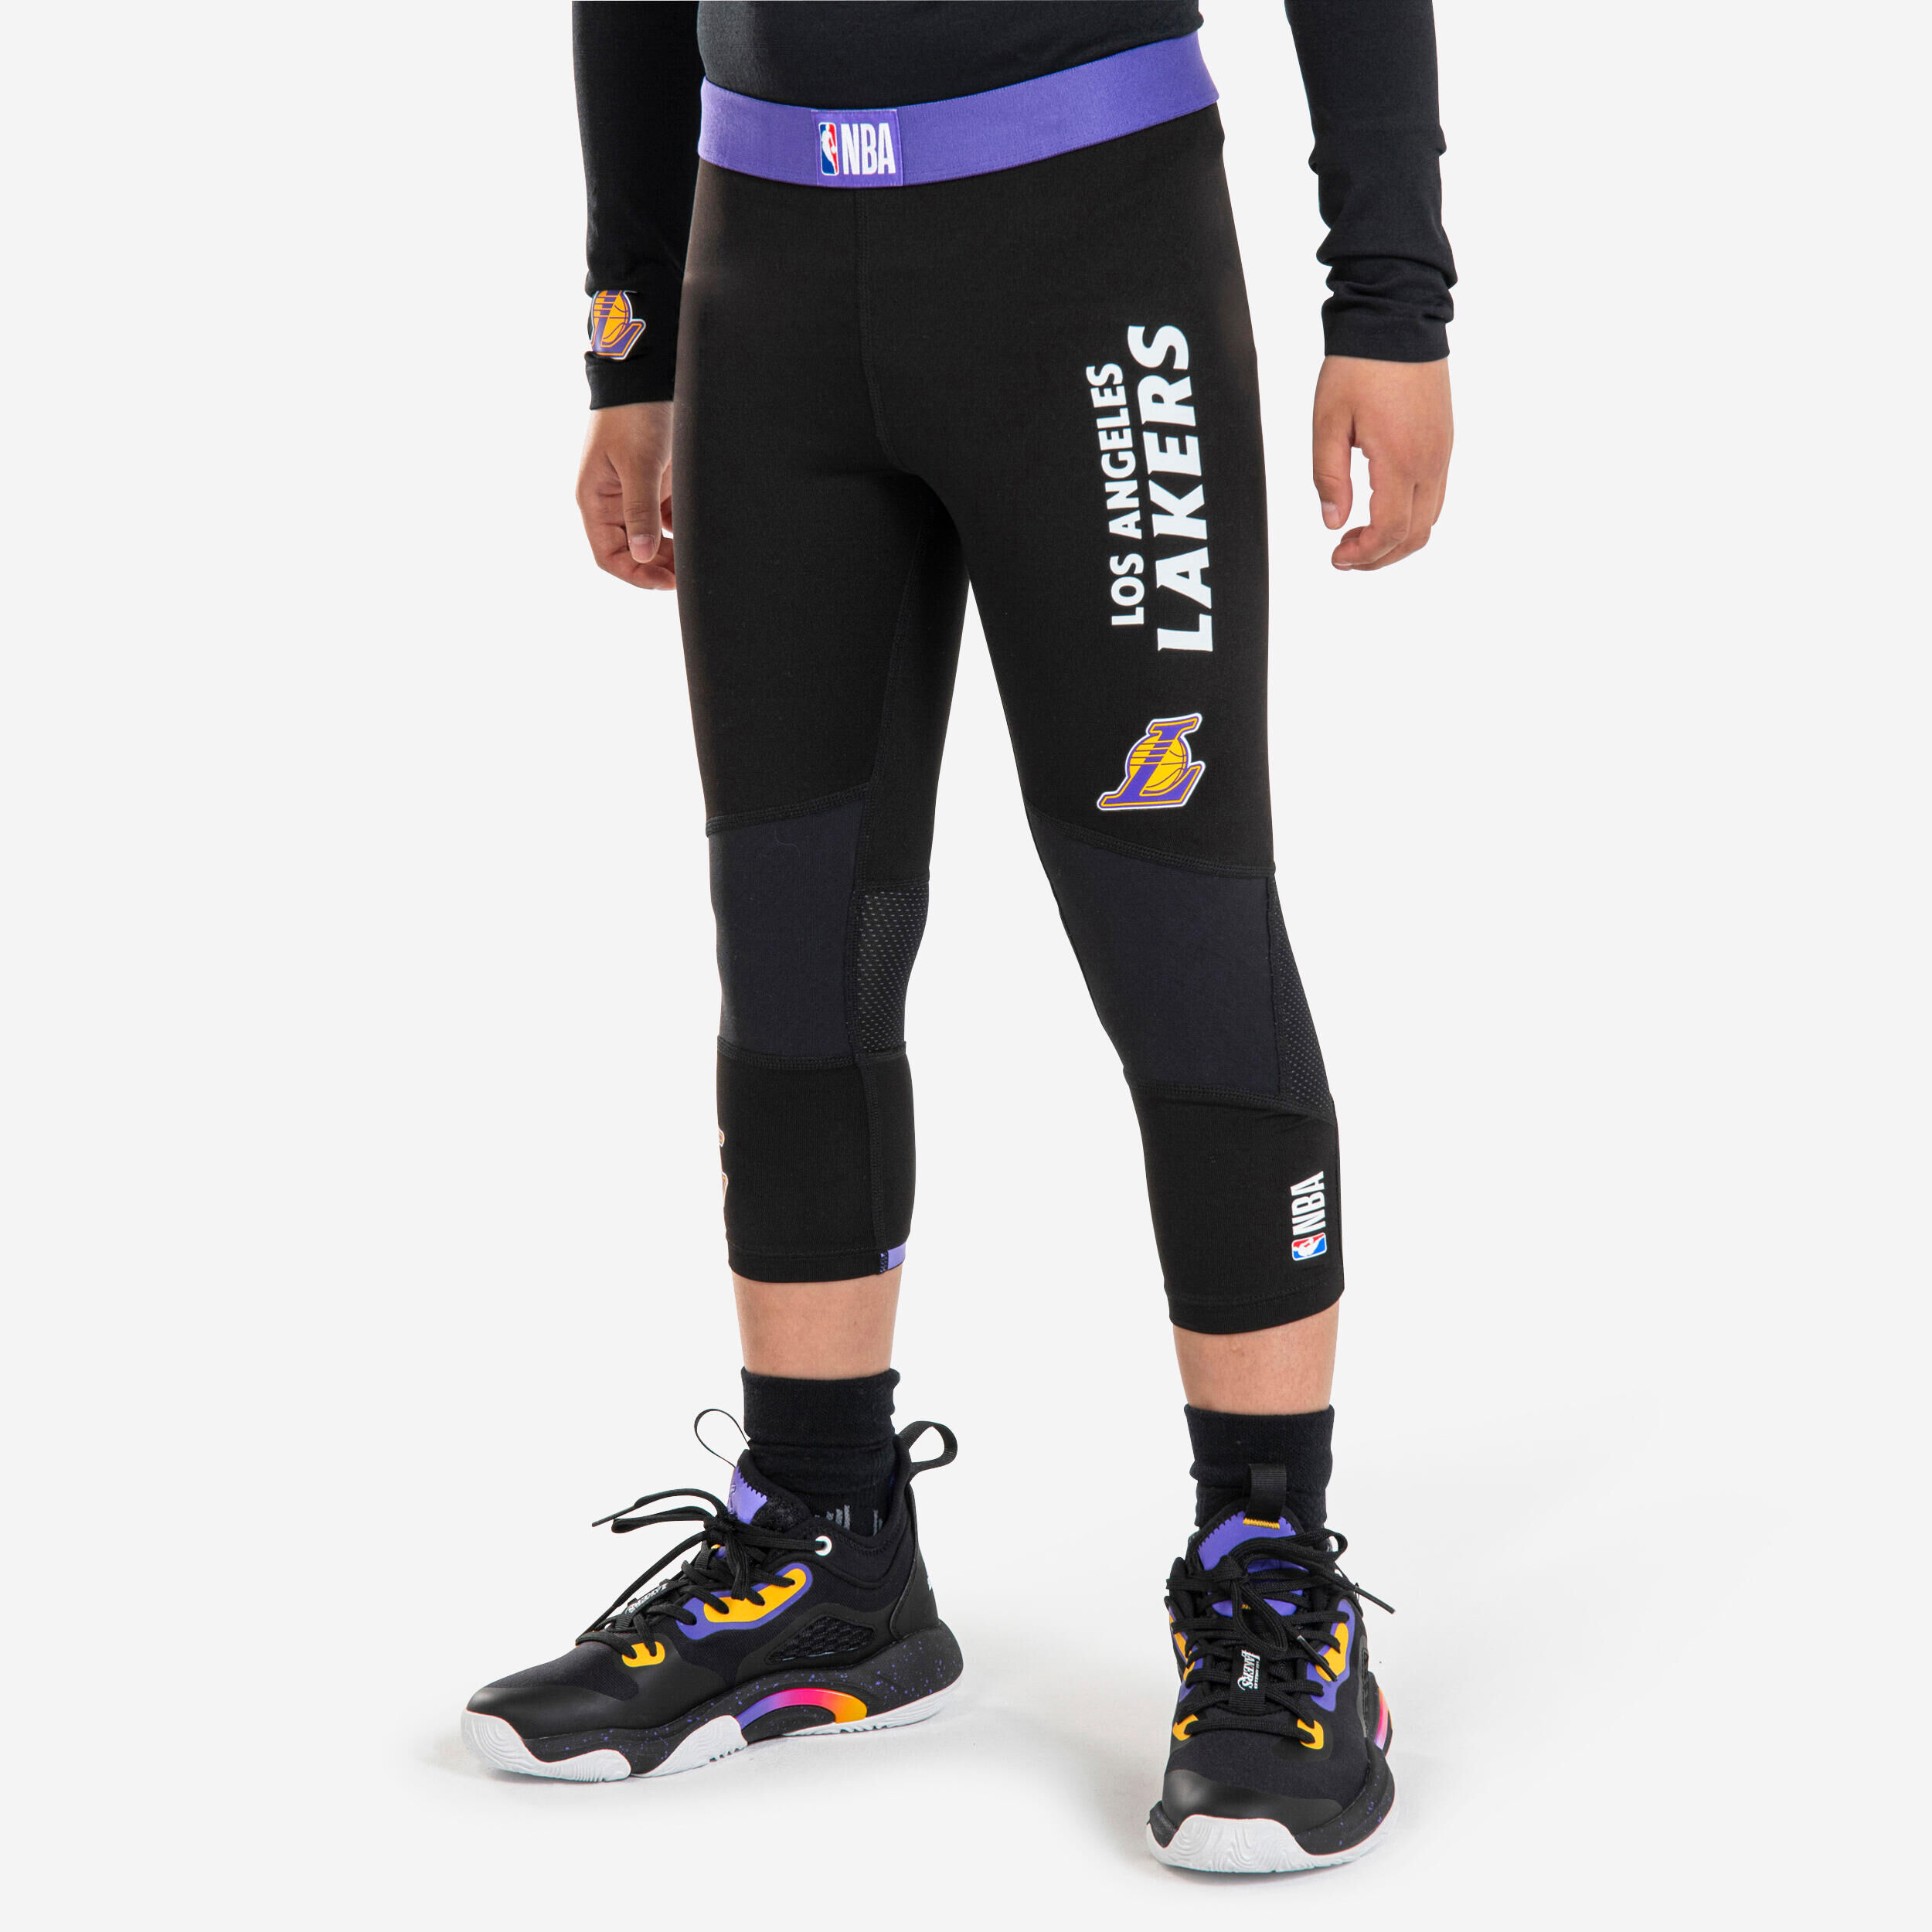 Men's Basketball Trousers With Knee Pads 3/4 Cropped Padded